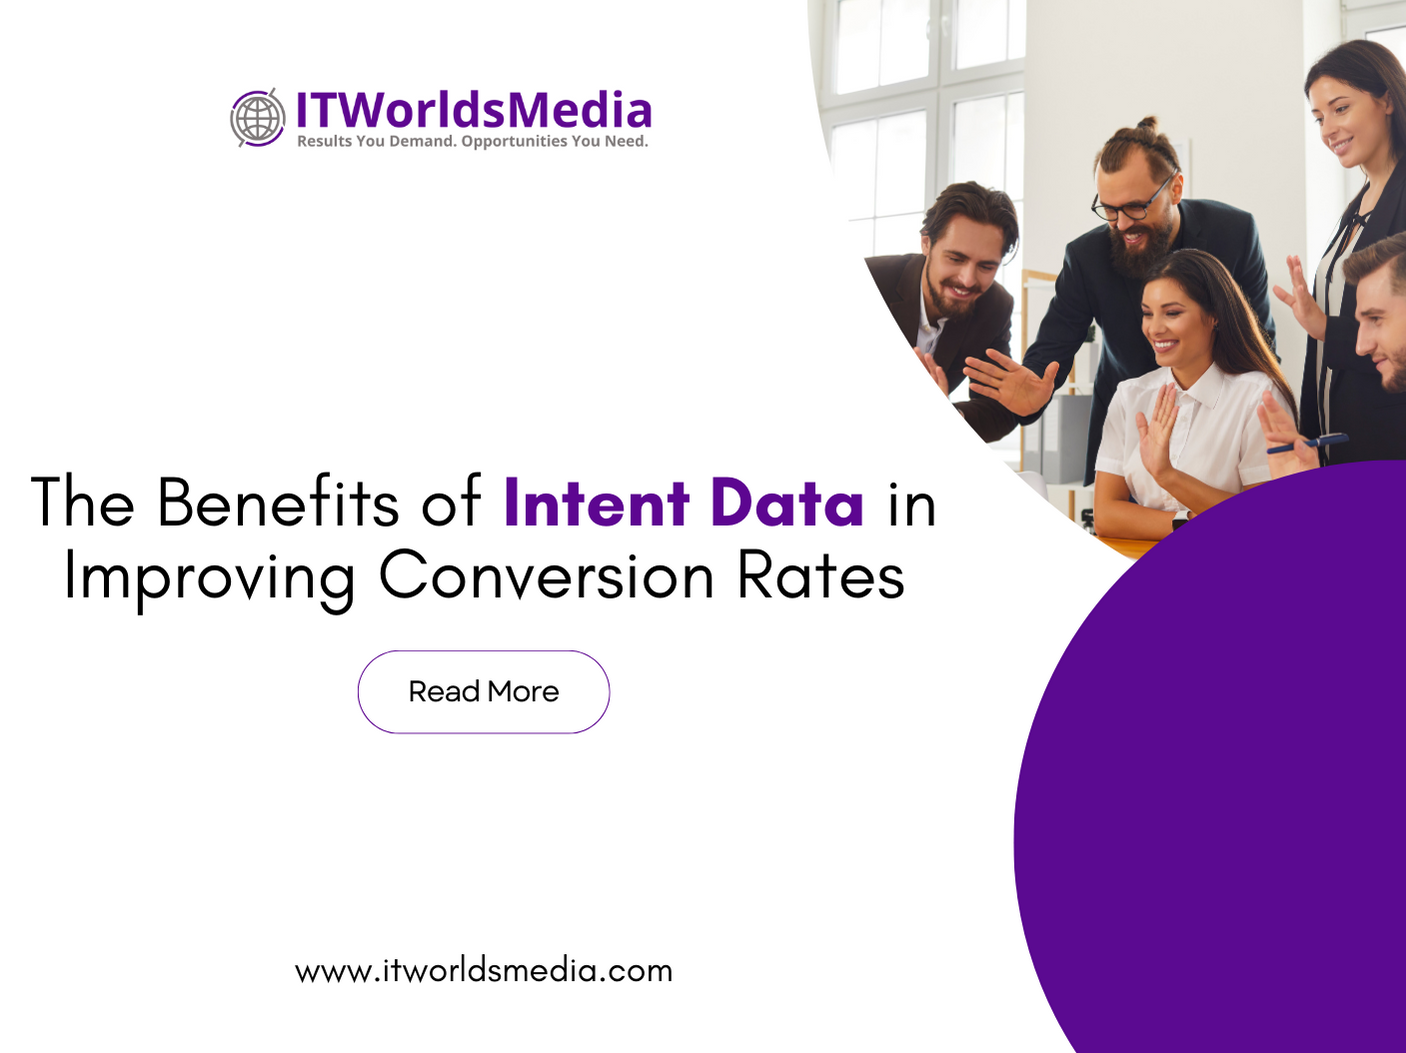 The Benefits of Intent Data in Improving Conversion Rates